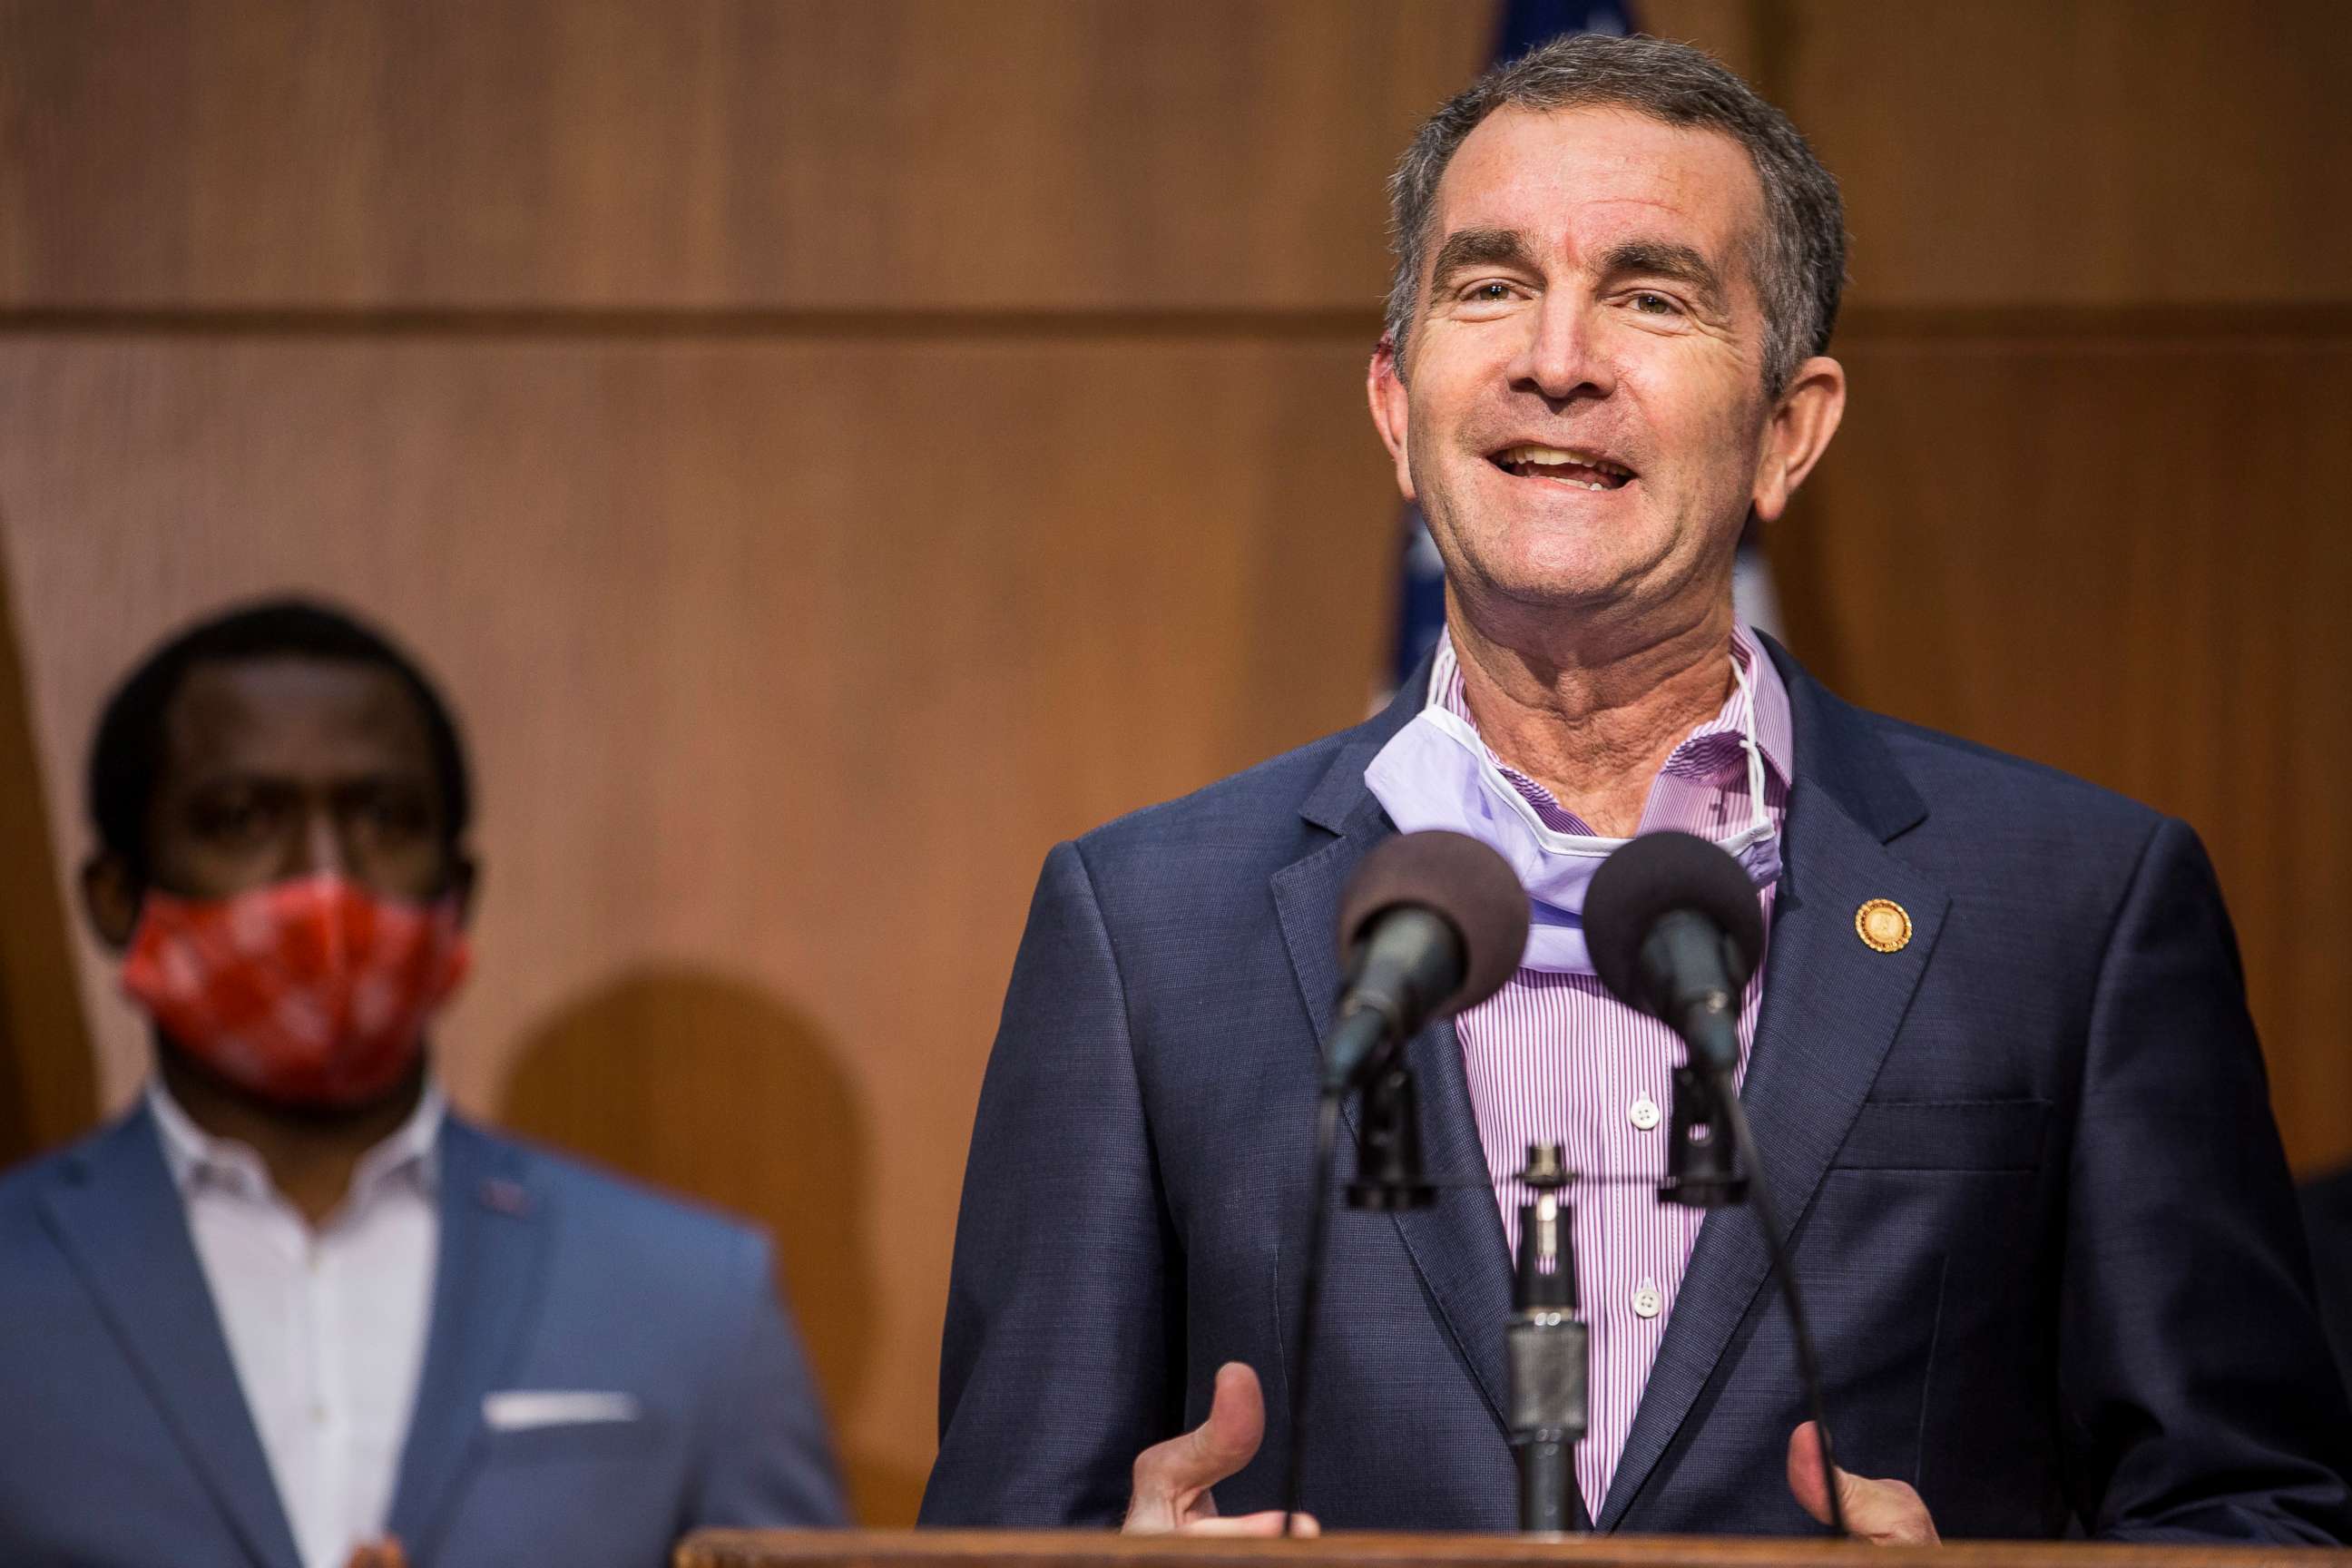 PHOTO: Virginia Gov. Ralph Northam speaks during a news conference, June 4, 2020, in Richmond, Virginia.